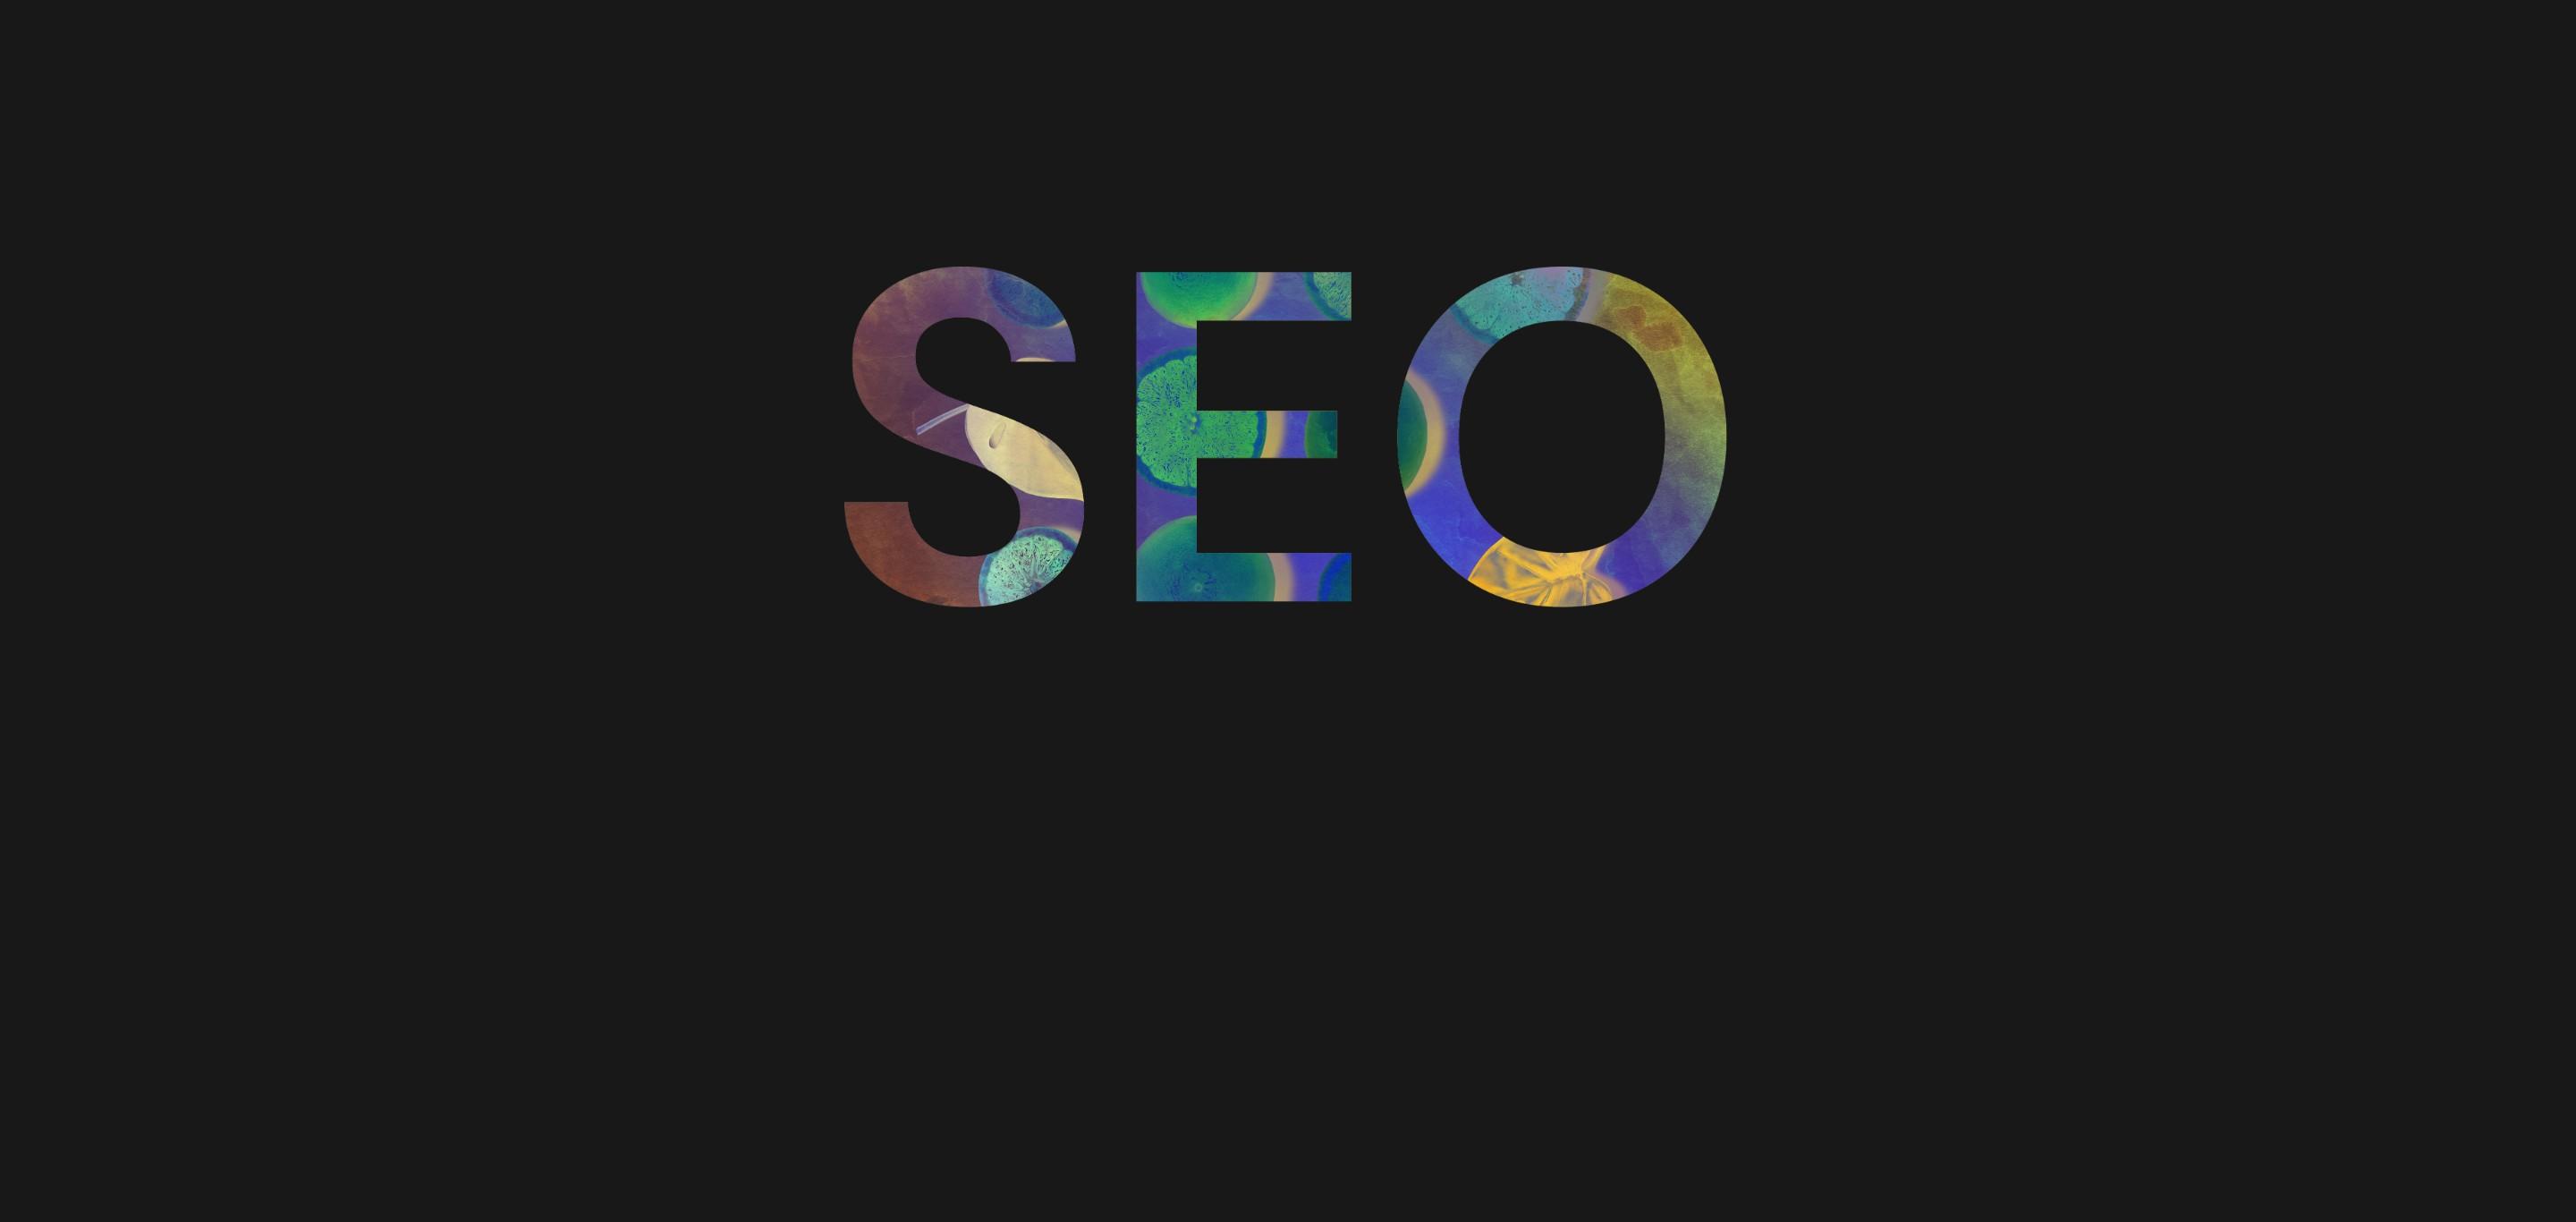 So, you want to do your own SEO?